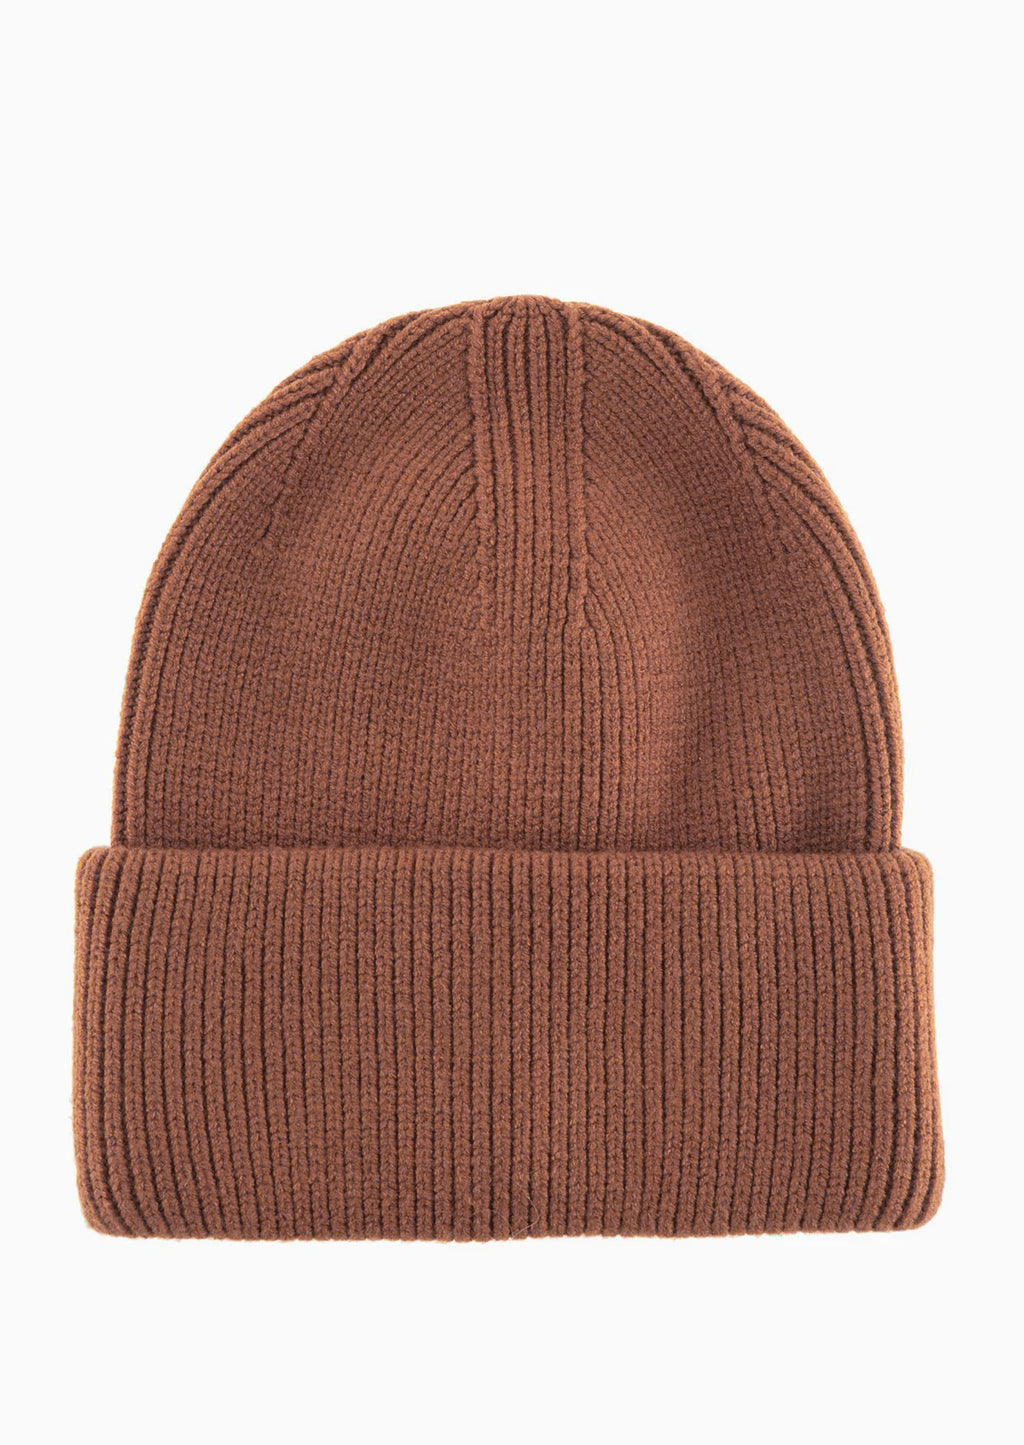 Chestnut: A knit beanie with oversized cuff in chestnut brown.